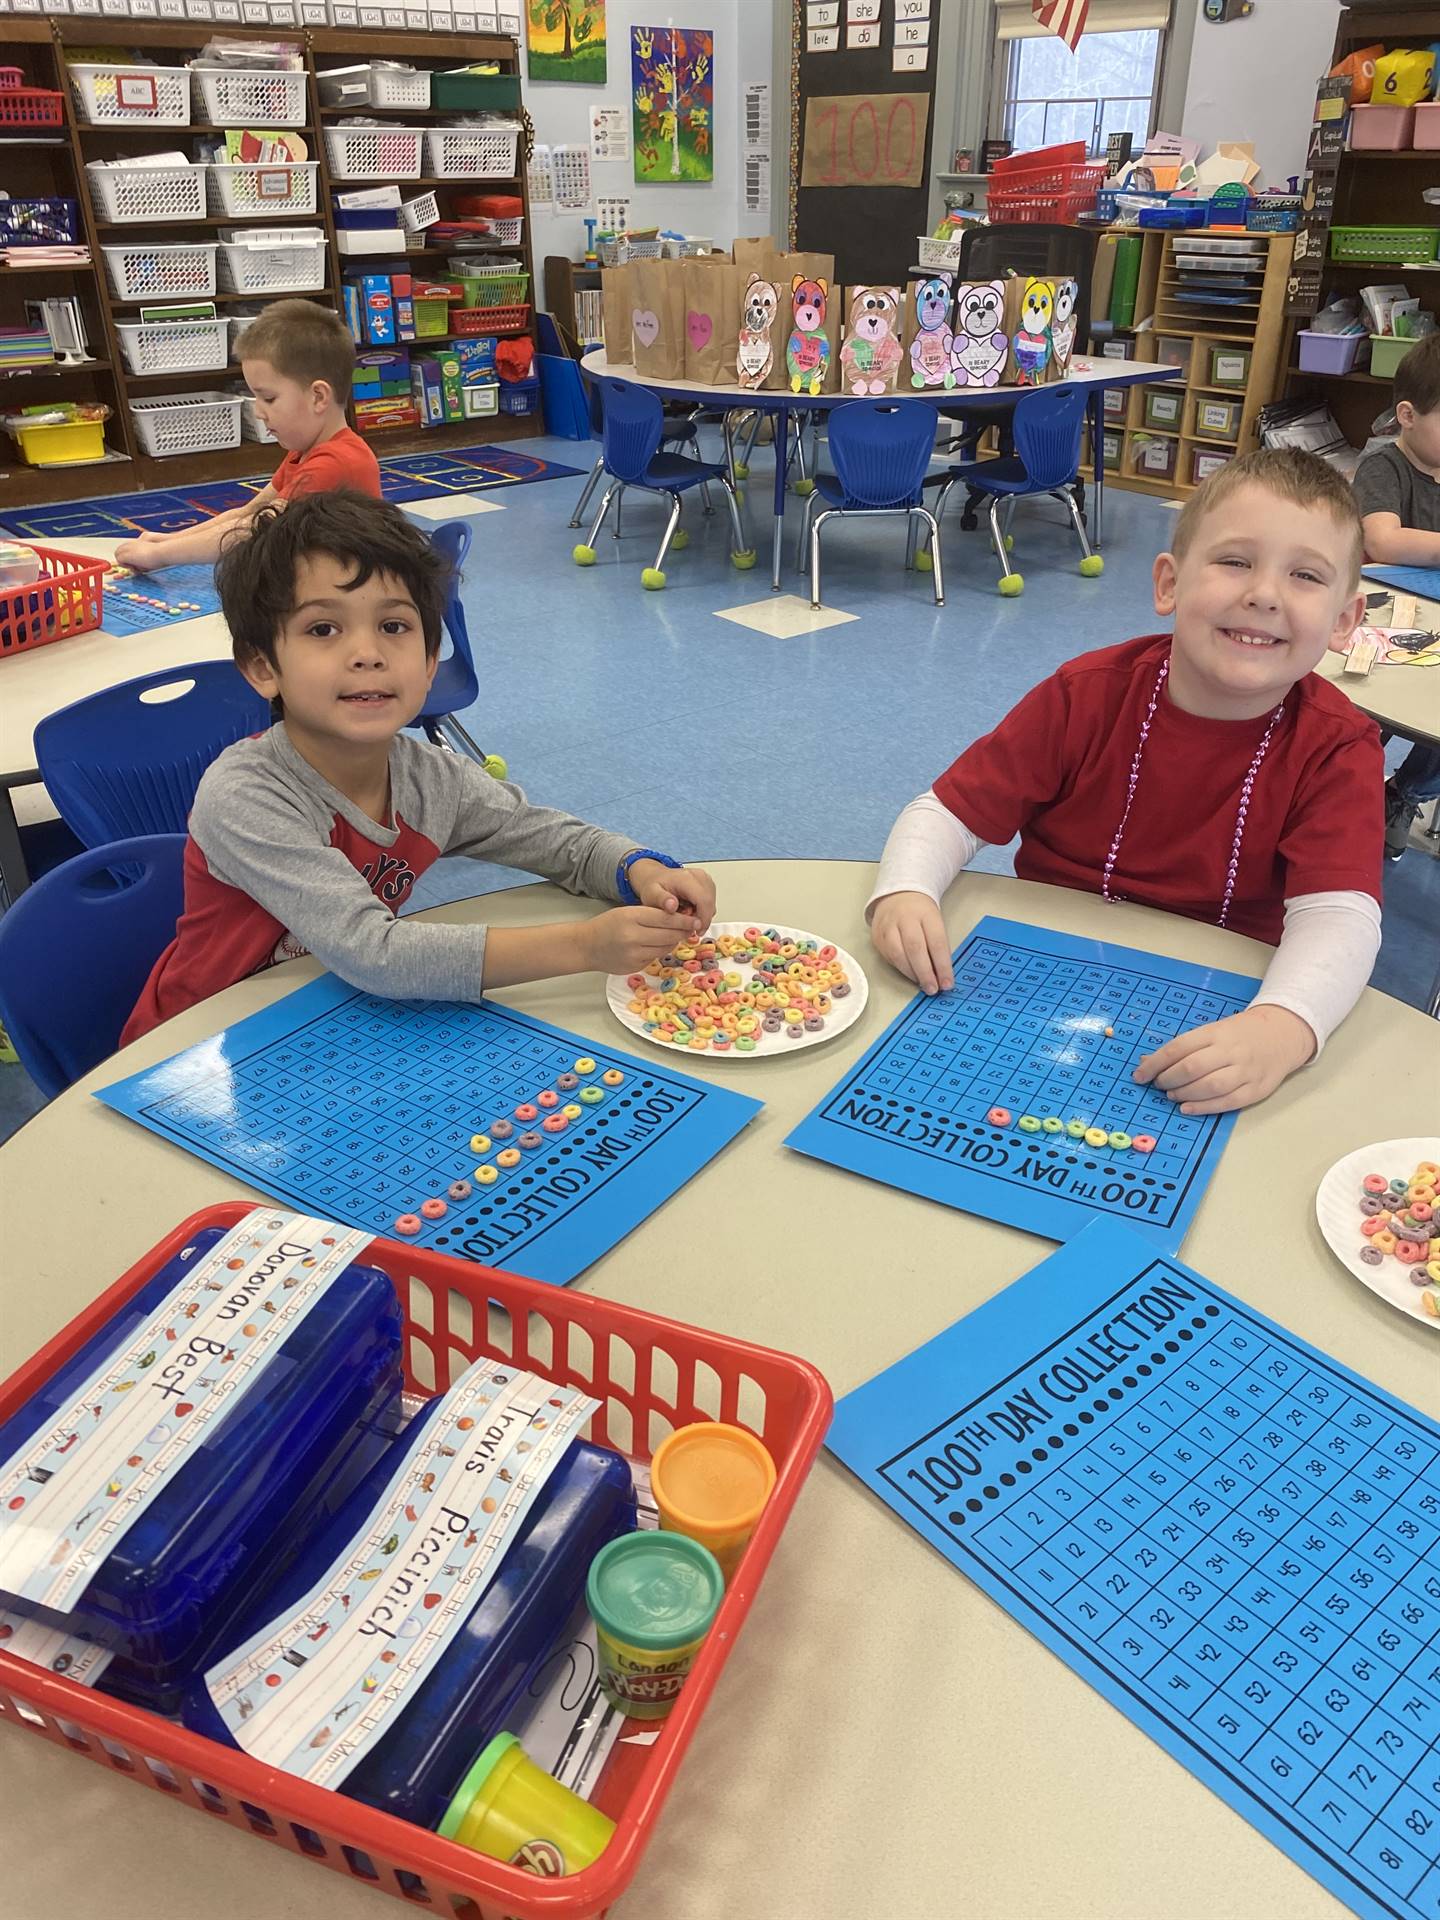 2 students counting fruit loops on a blue counting board